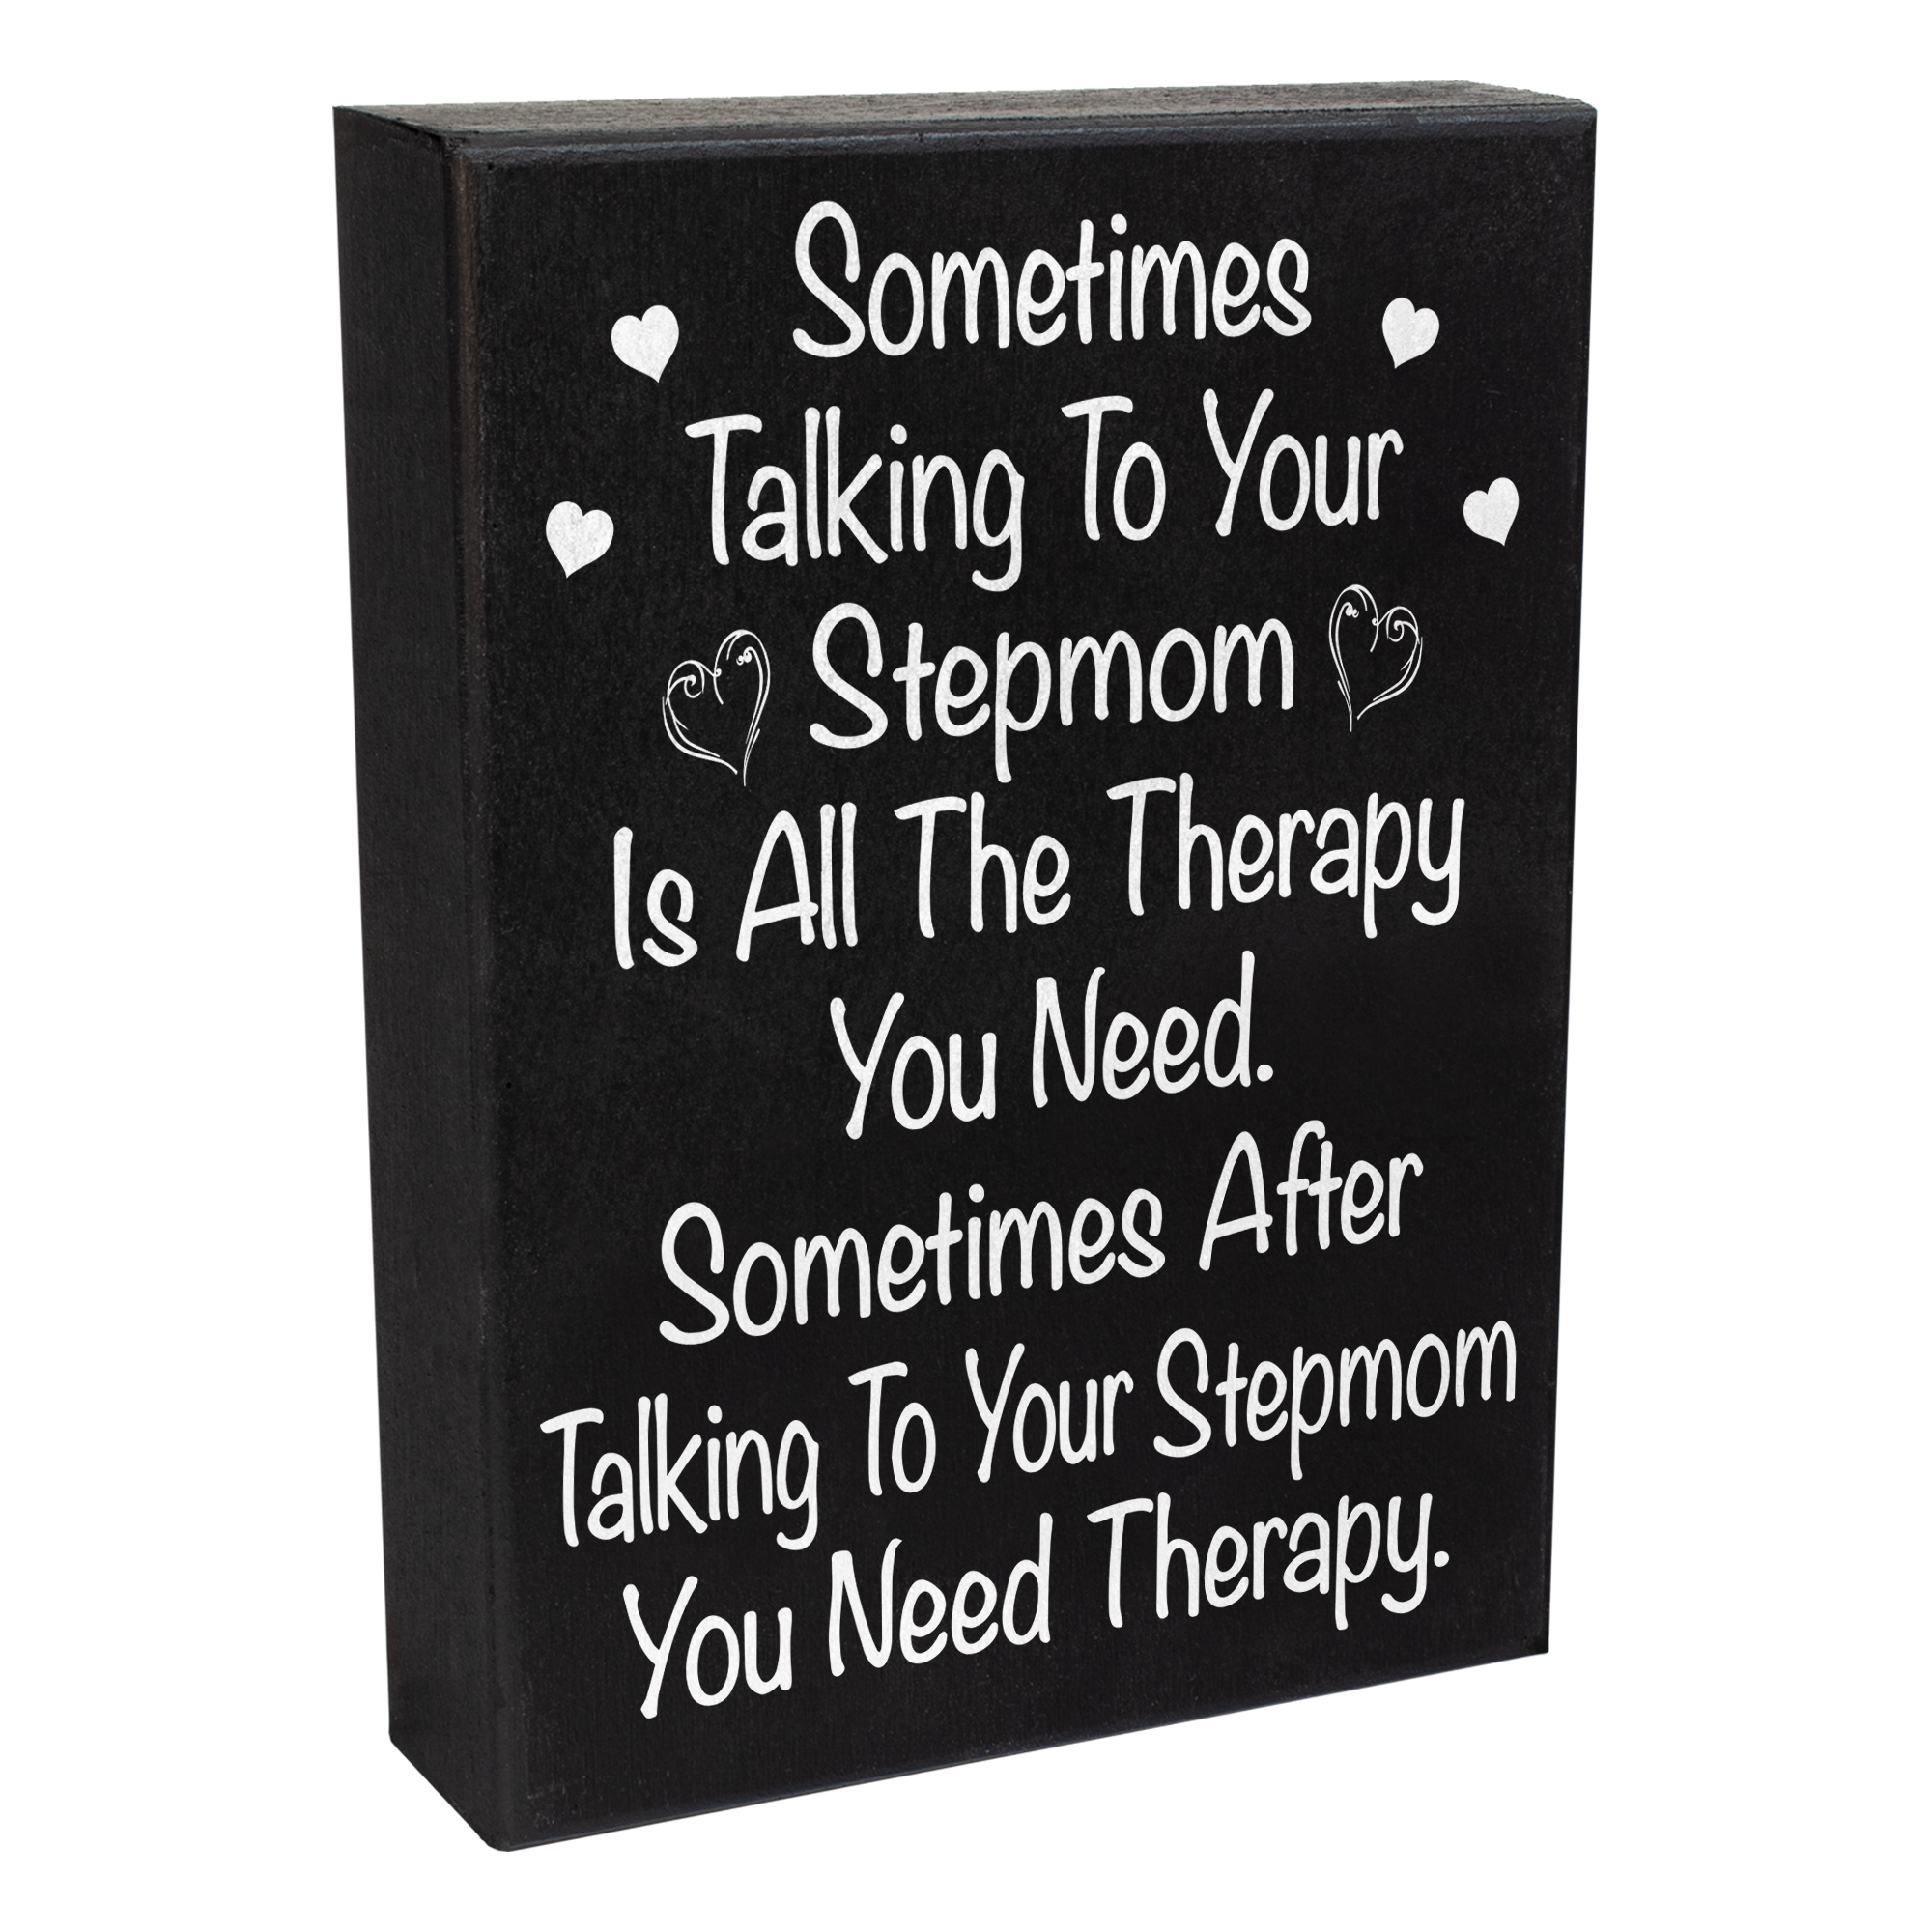 JennyGems Stepmom Gifts Sign Decor, Funny Stepmom Birthday Gifts, Gag Gift for Stepmother, Sarcastic Humor, Bonus Mom Gifts, 6x8 Inches, Made in USA